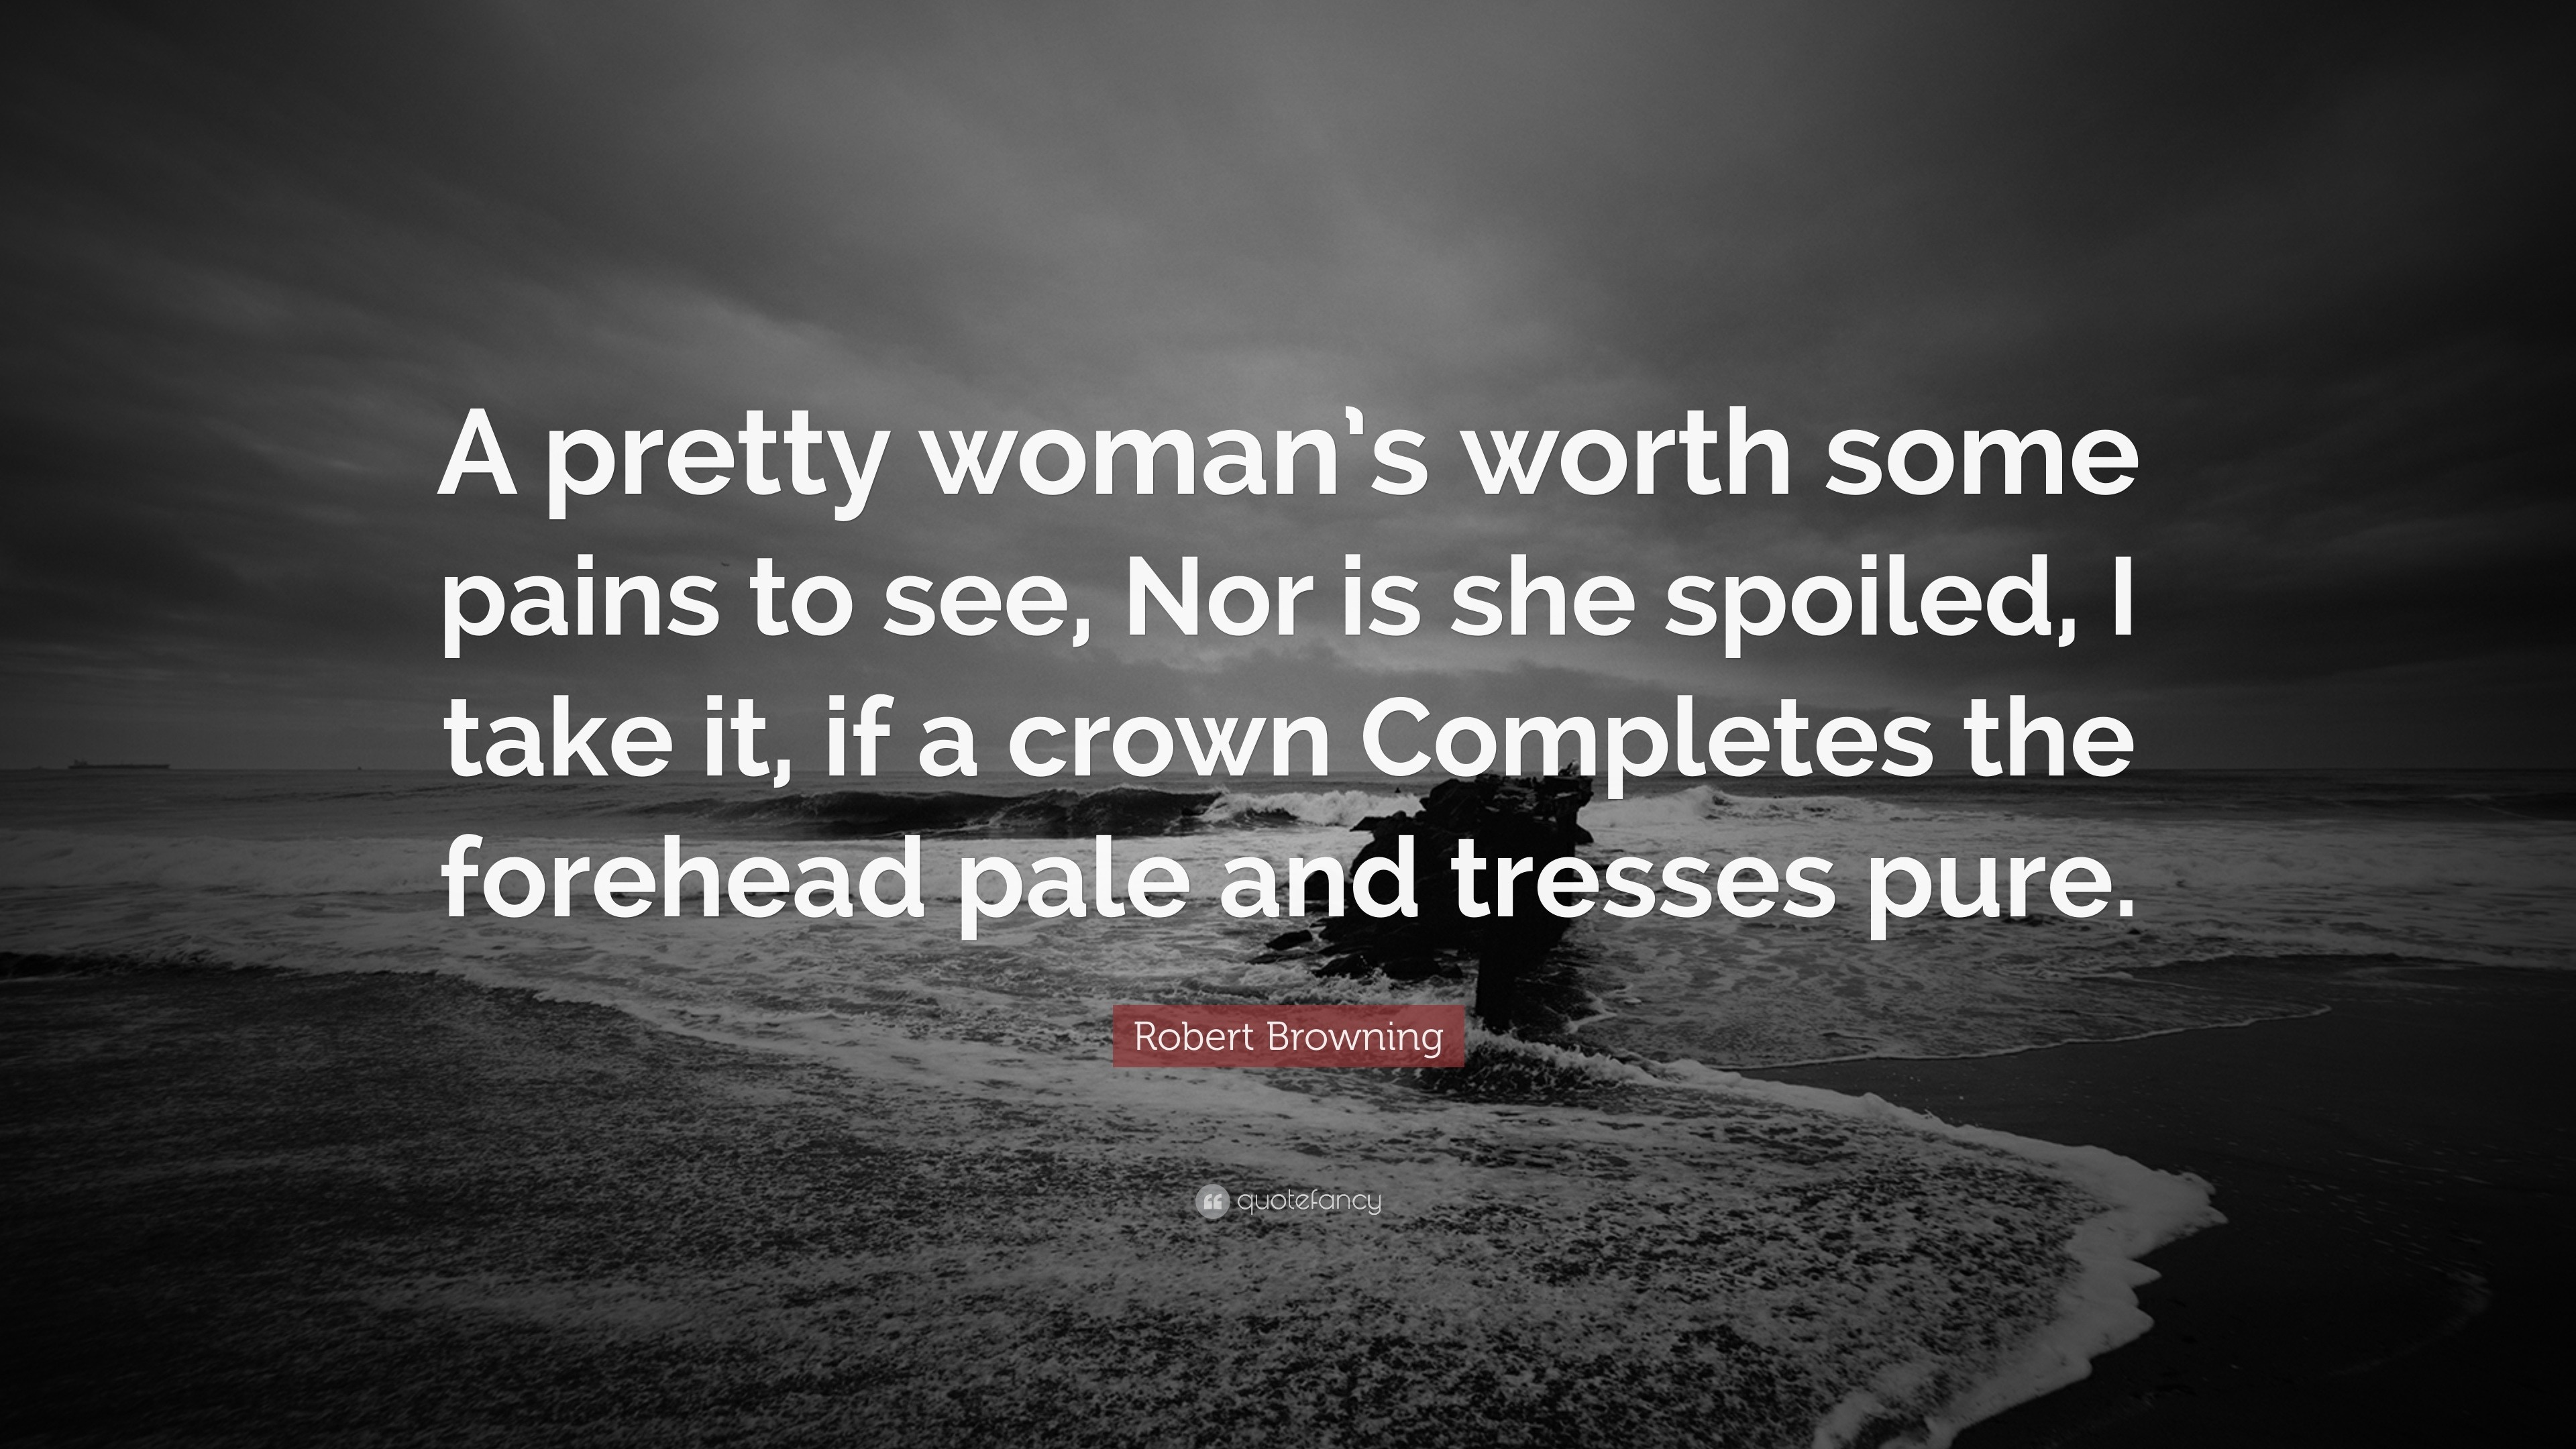 Robert Browning Quote: “A pretty woman’s worth some pains to see, Nor ...